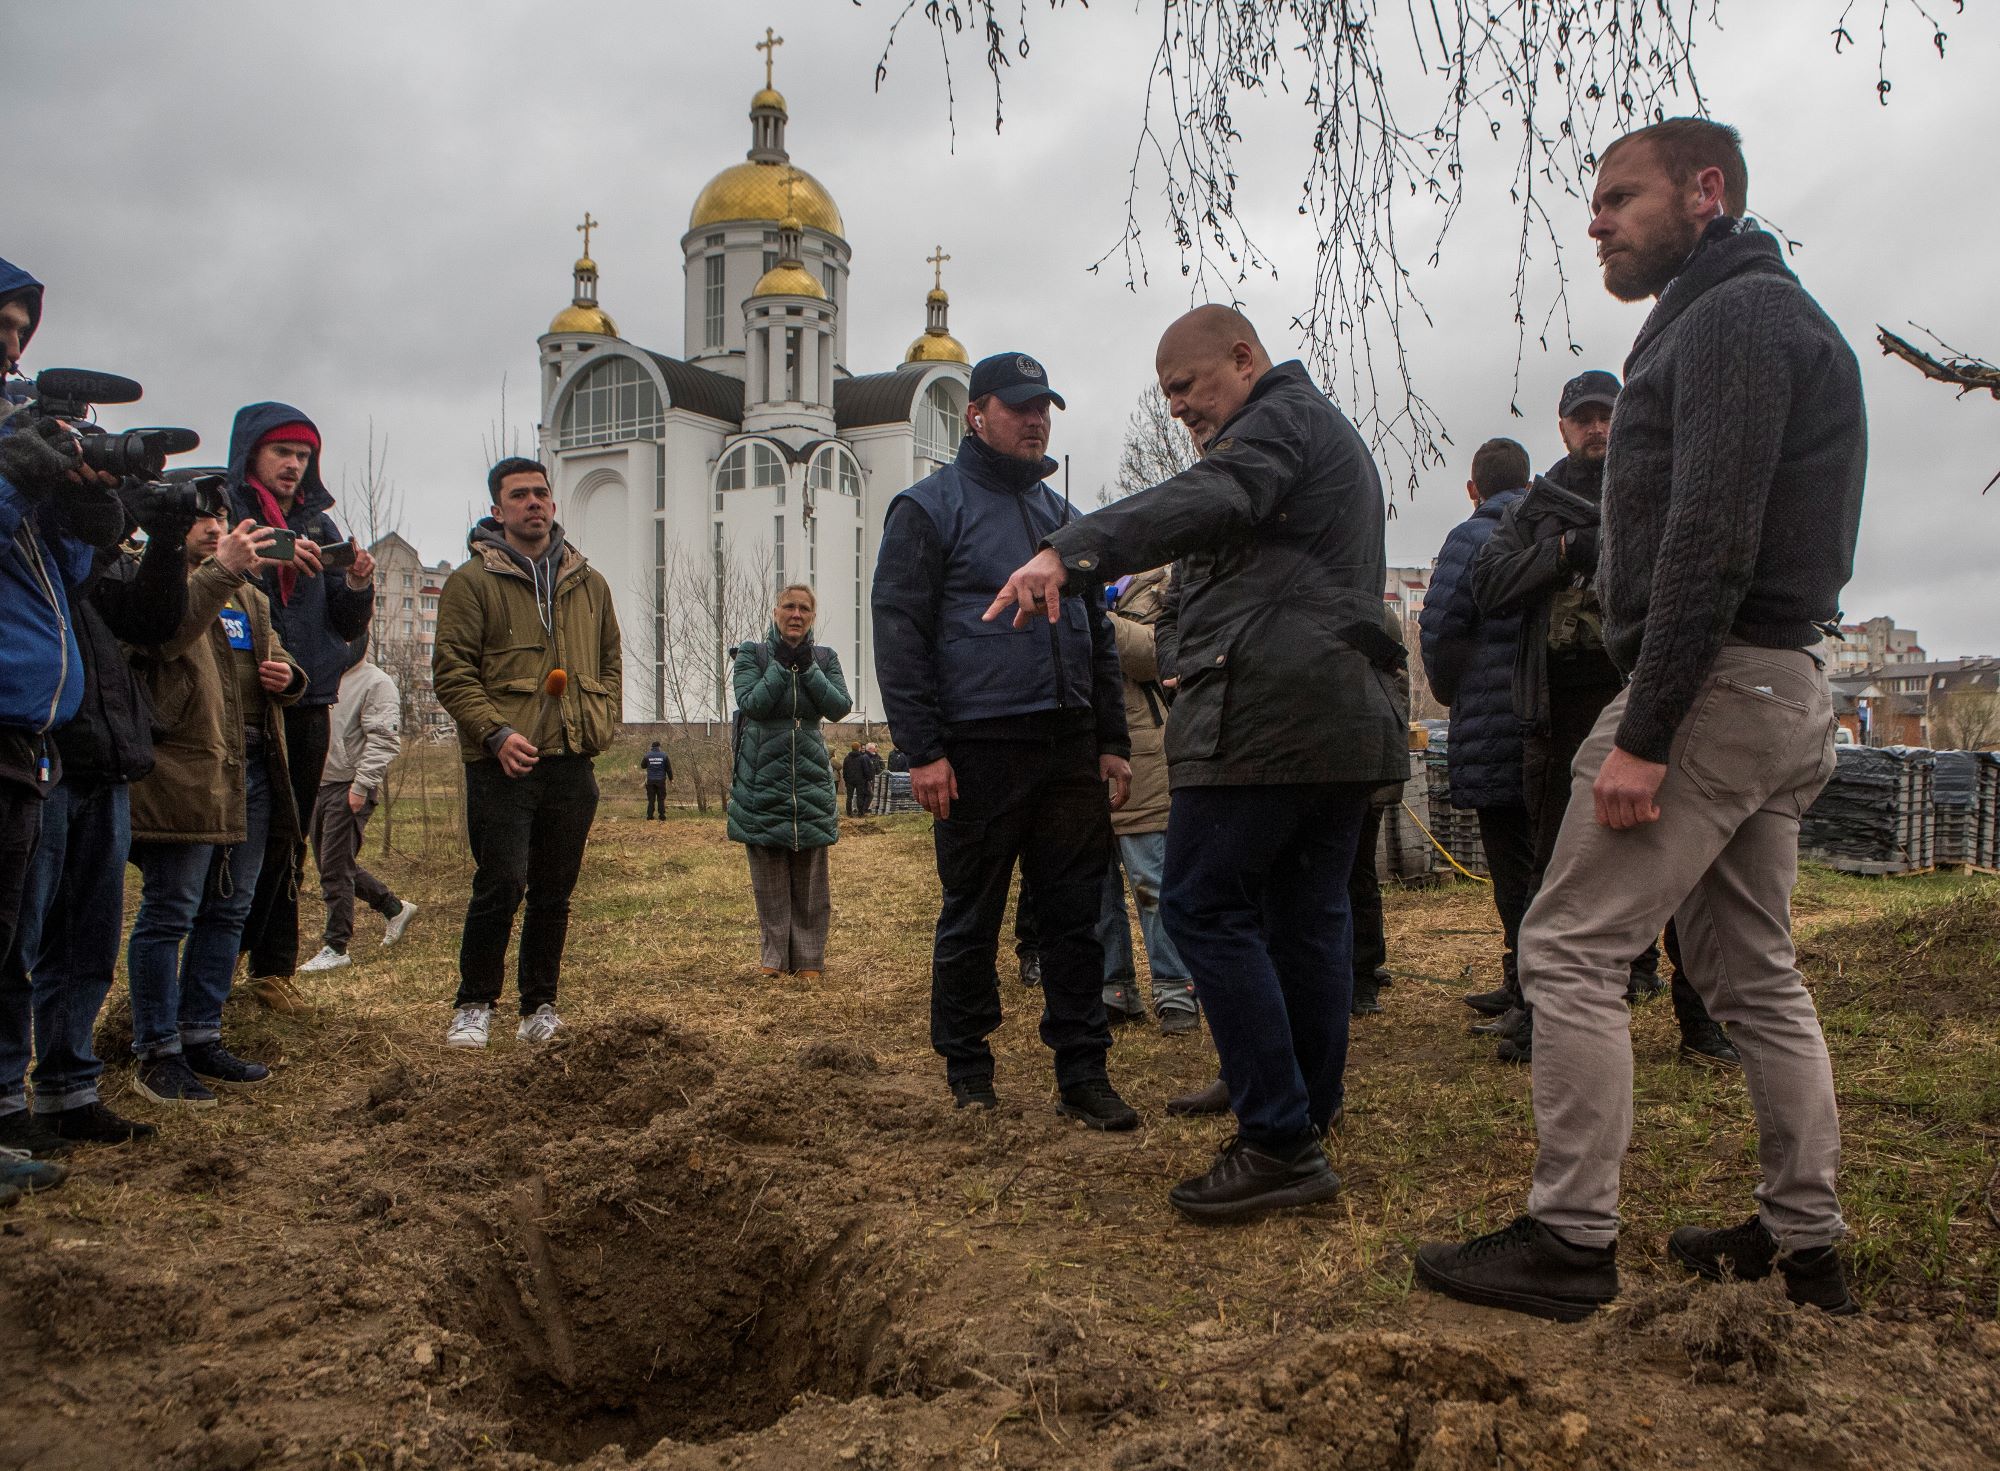 Vukusic-International Criminal Court (ICC) Prosecutor Karim Khan stands next to a grave where remains of three bodies were found, in the town of Bucha, outside Kyiv, Ukraine April 13, 2022. REUTERS